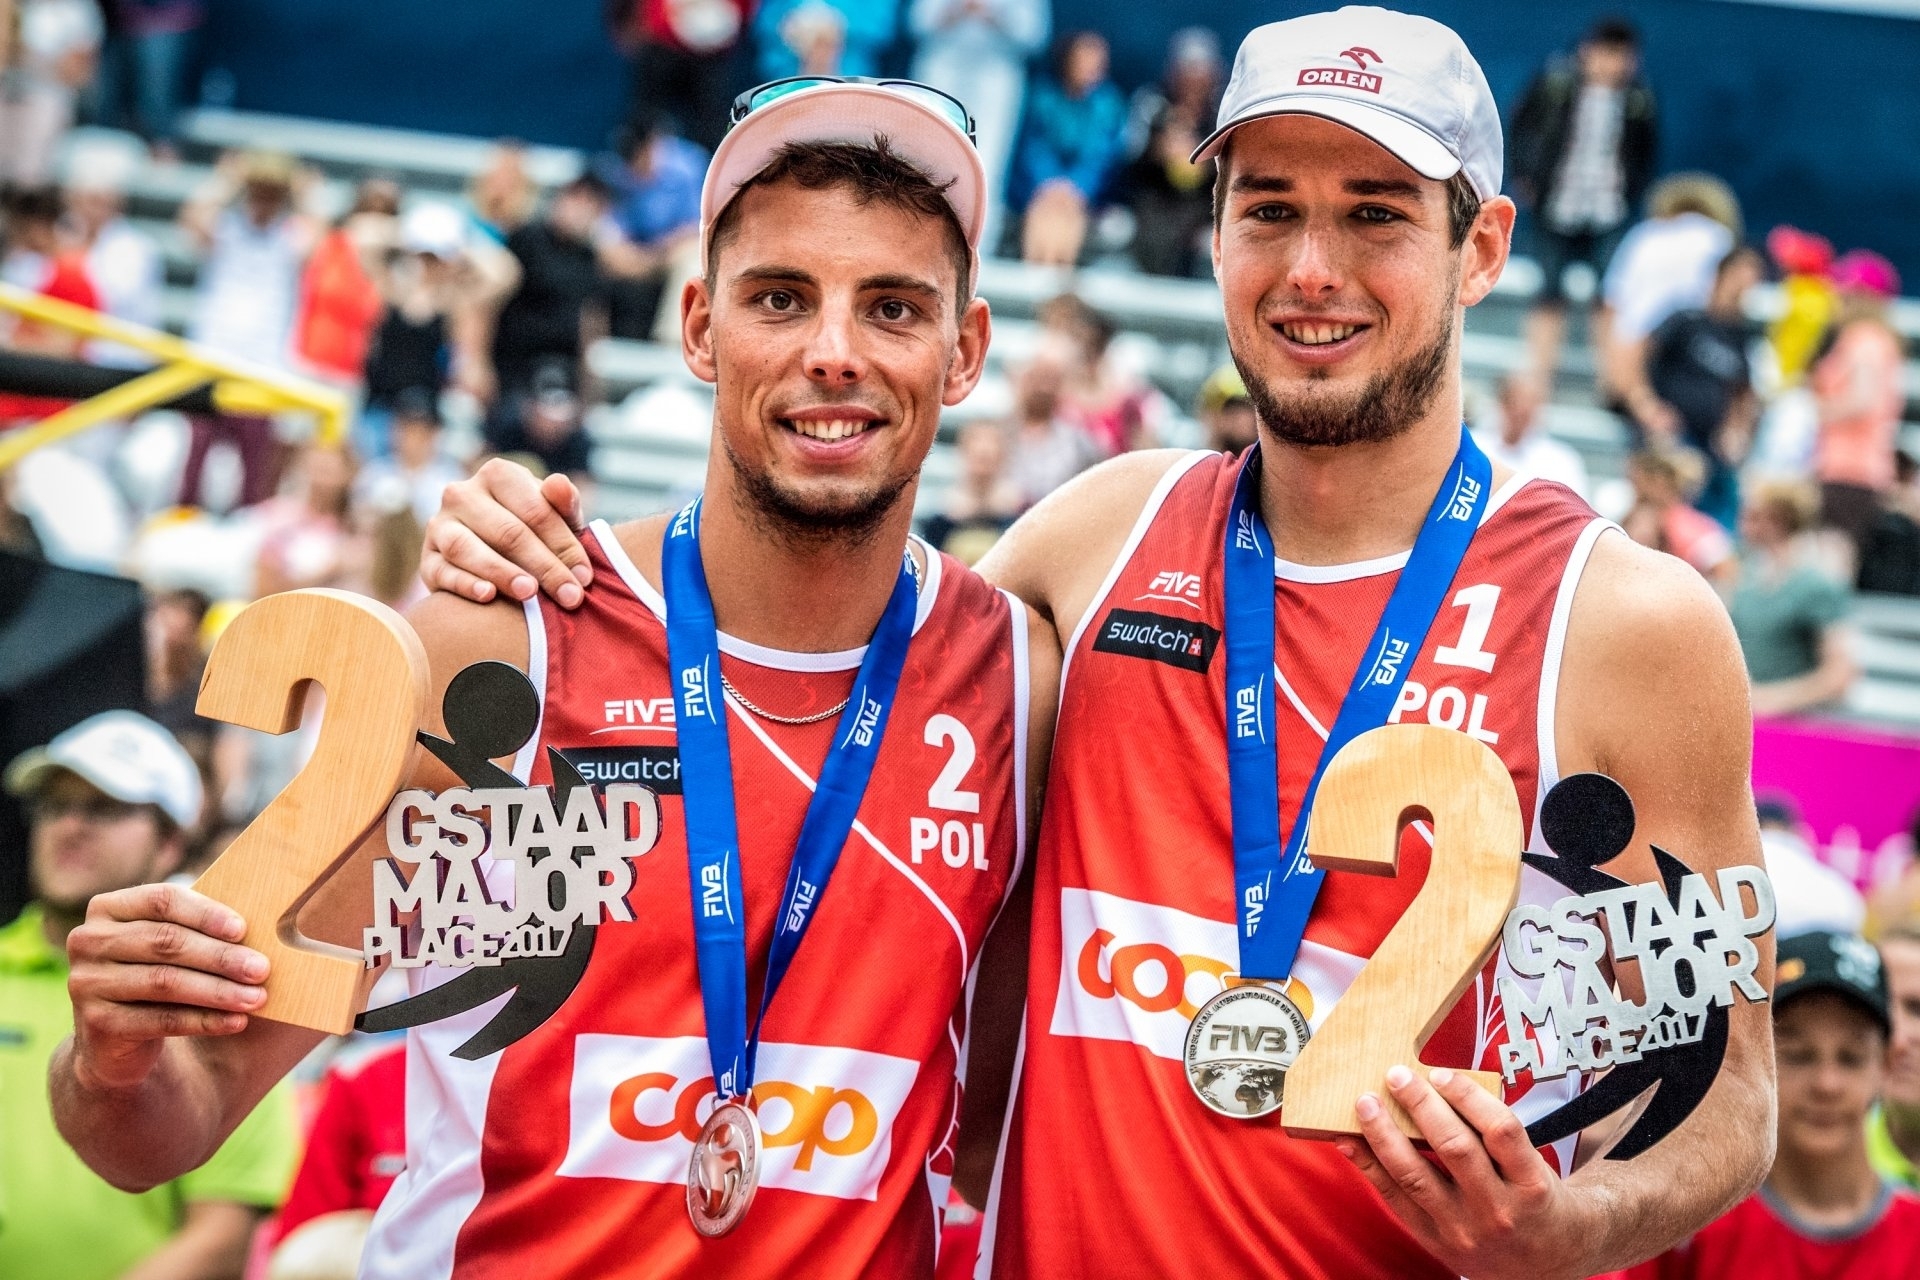 The duo picked up a silver medal and a cowbell at last year's Gstaad Major